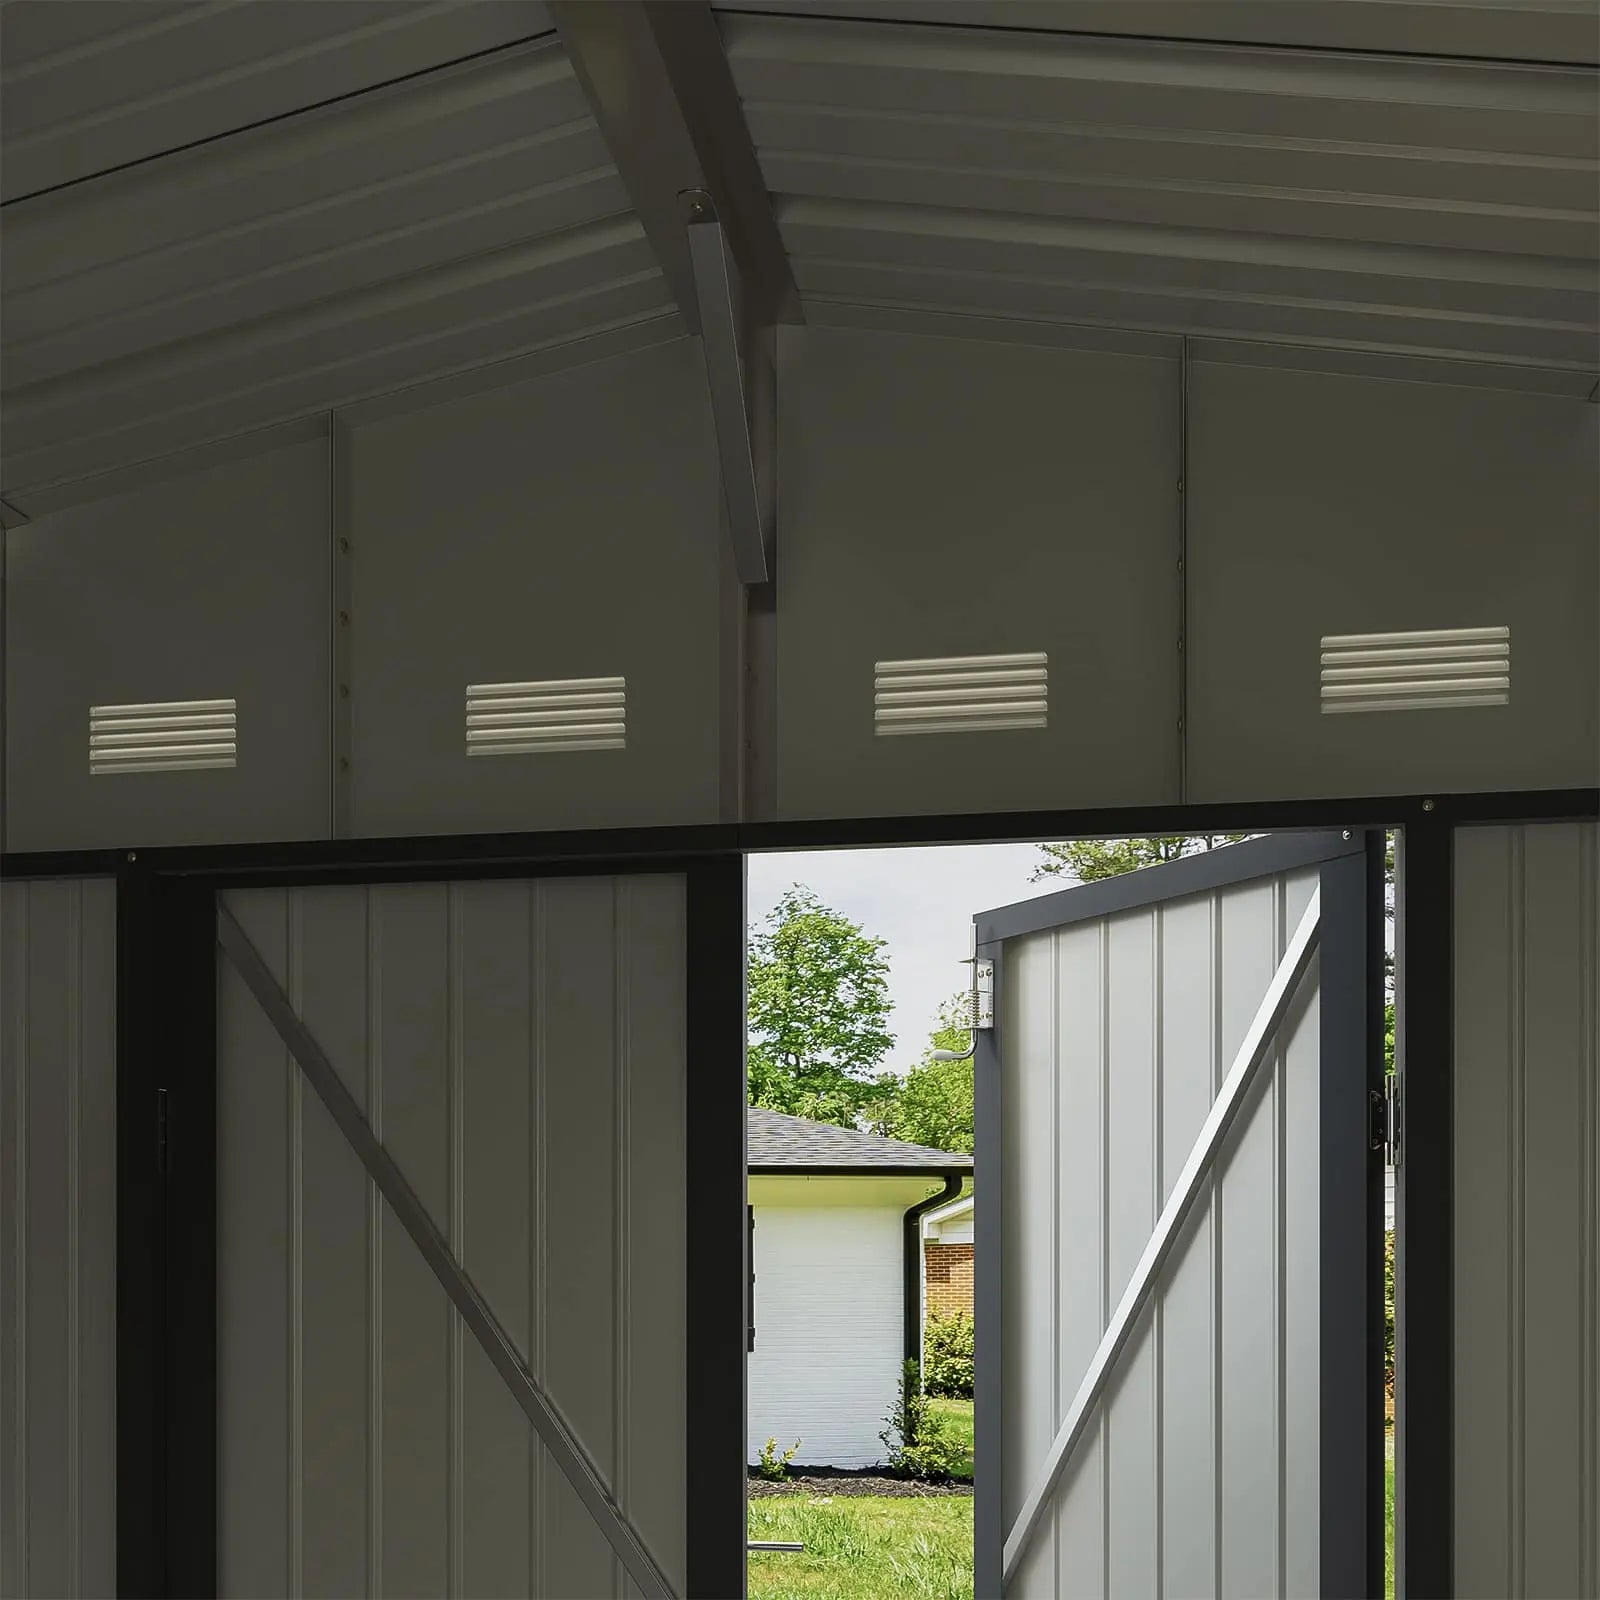 Patiowell 10x12 Metal Shed-Air Vents